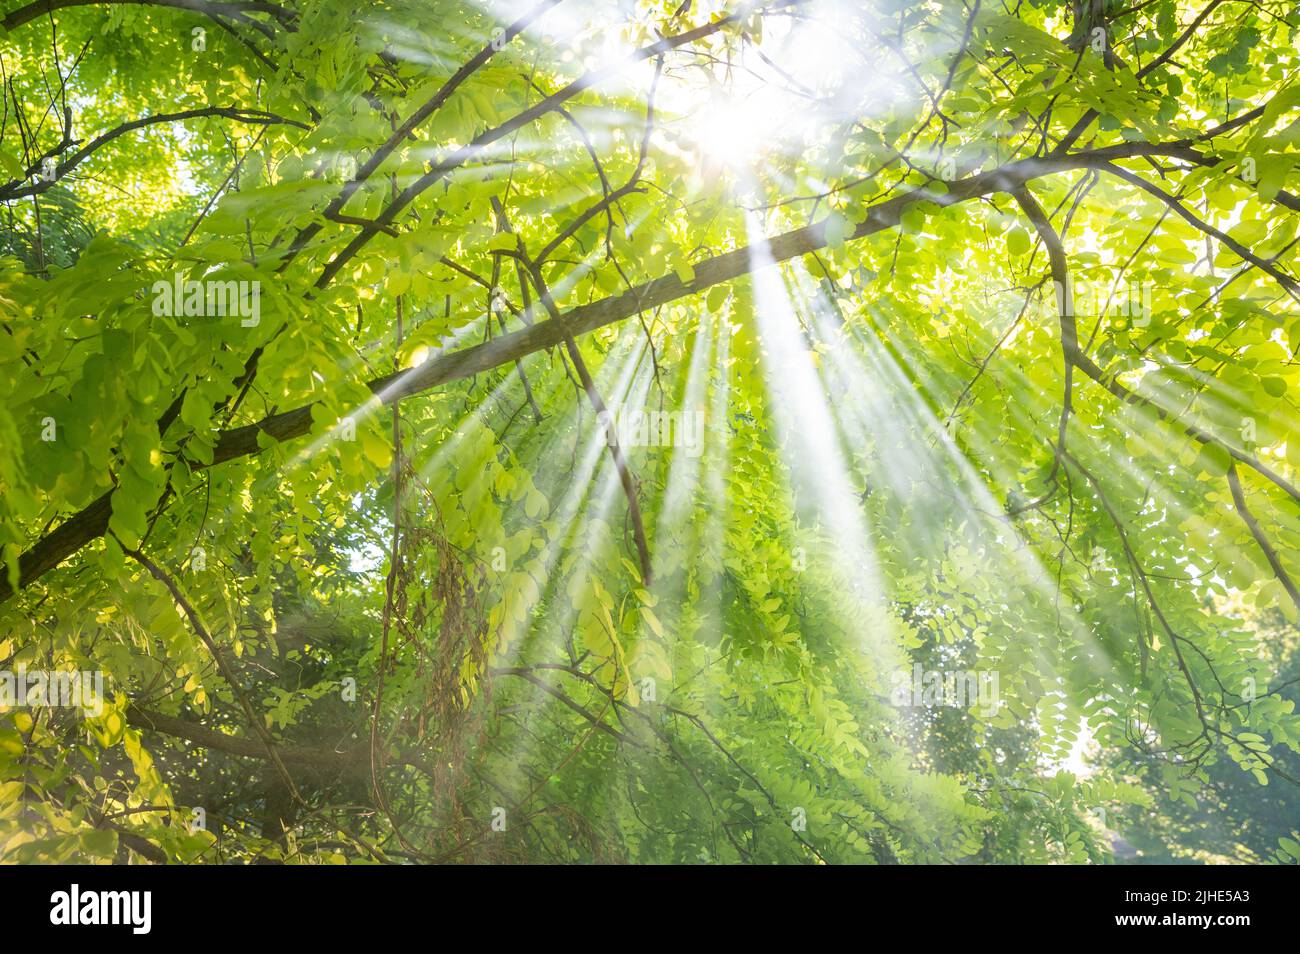 Scenic forest of fresh green deciduous trees framed by leaves, with the sun casting its warm rays through the foliage Stock Photo